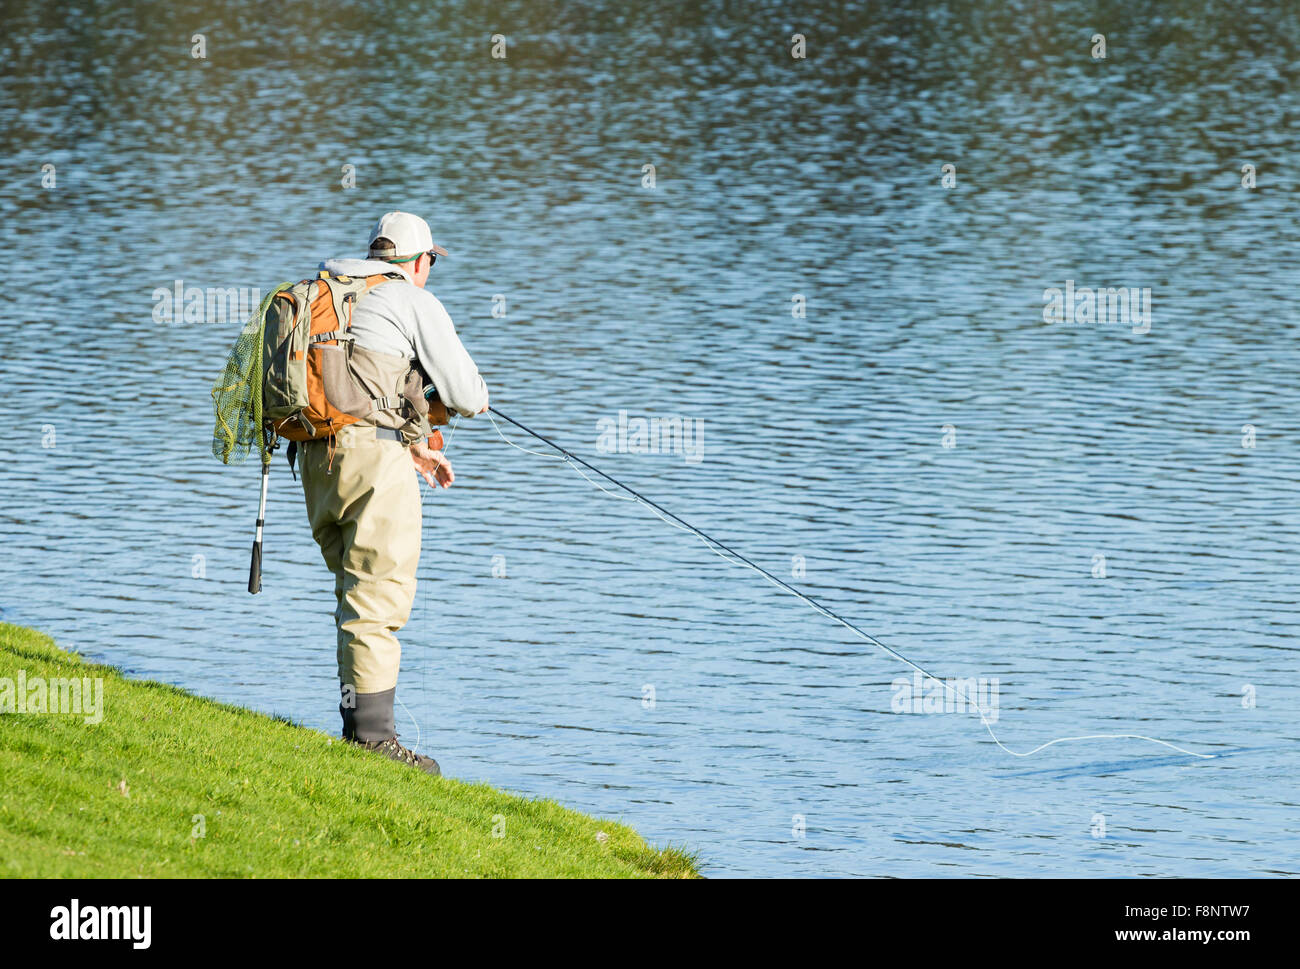 Man uses fishing rod to fish on the sea rocks in Cabo Frio, Rio de